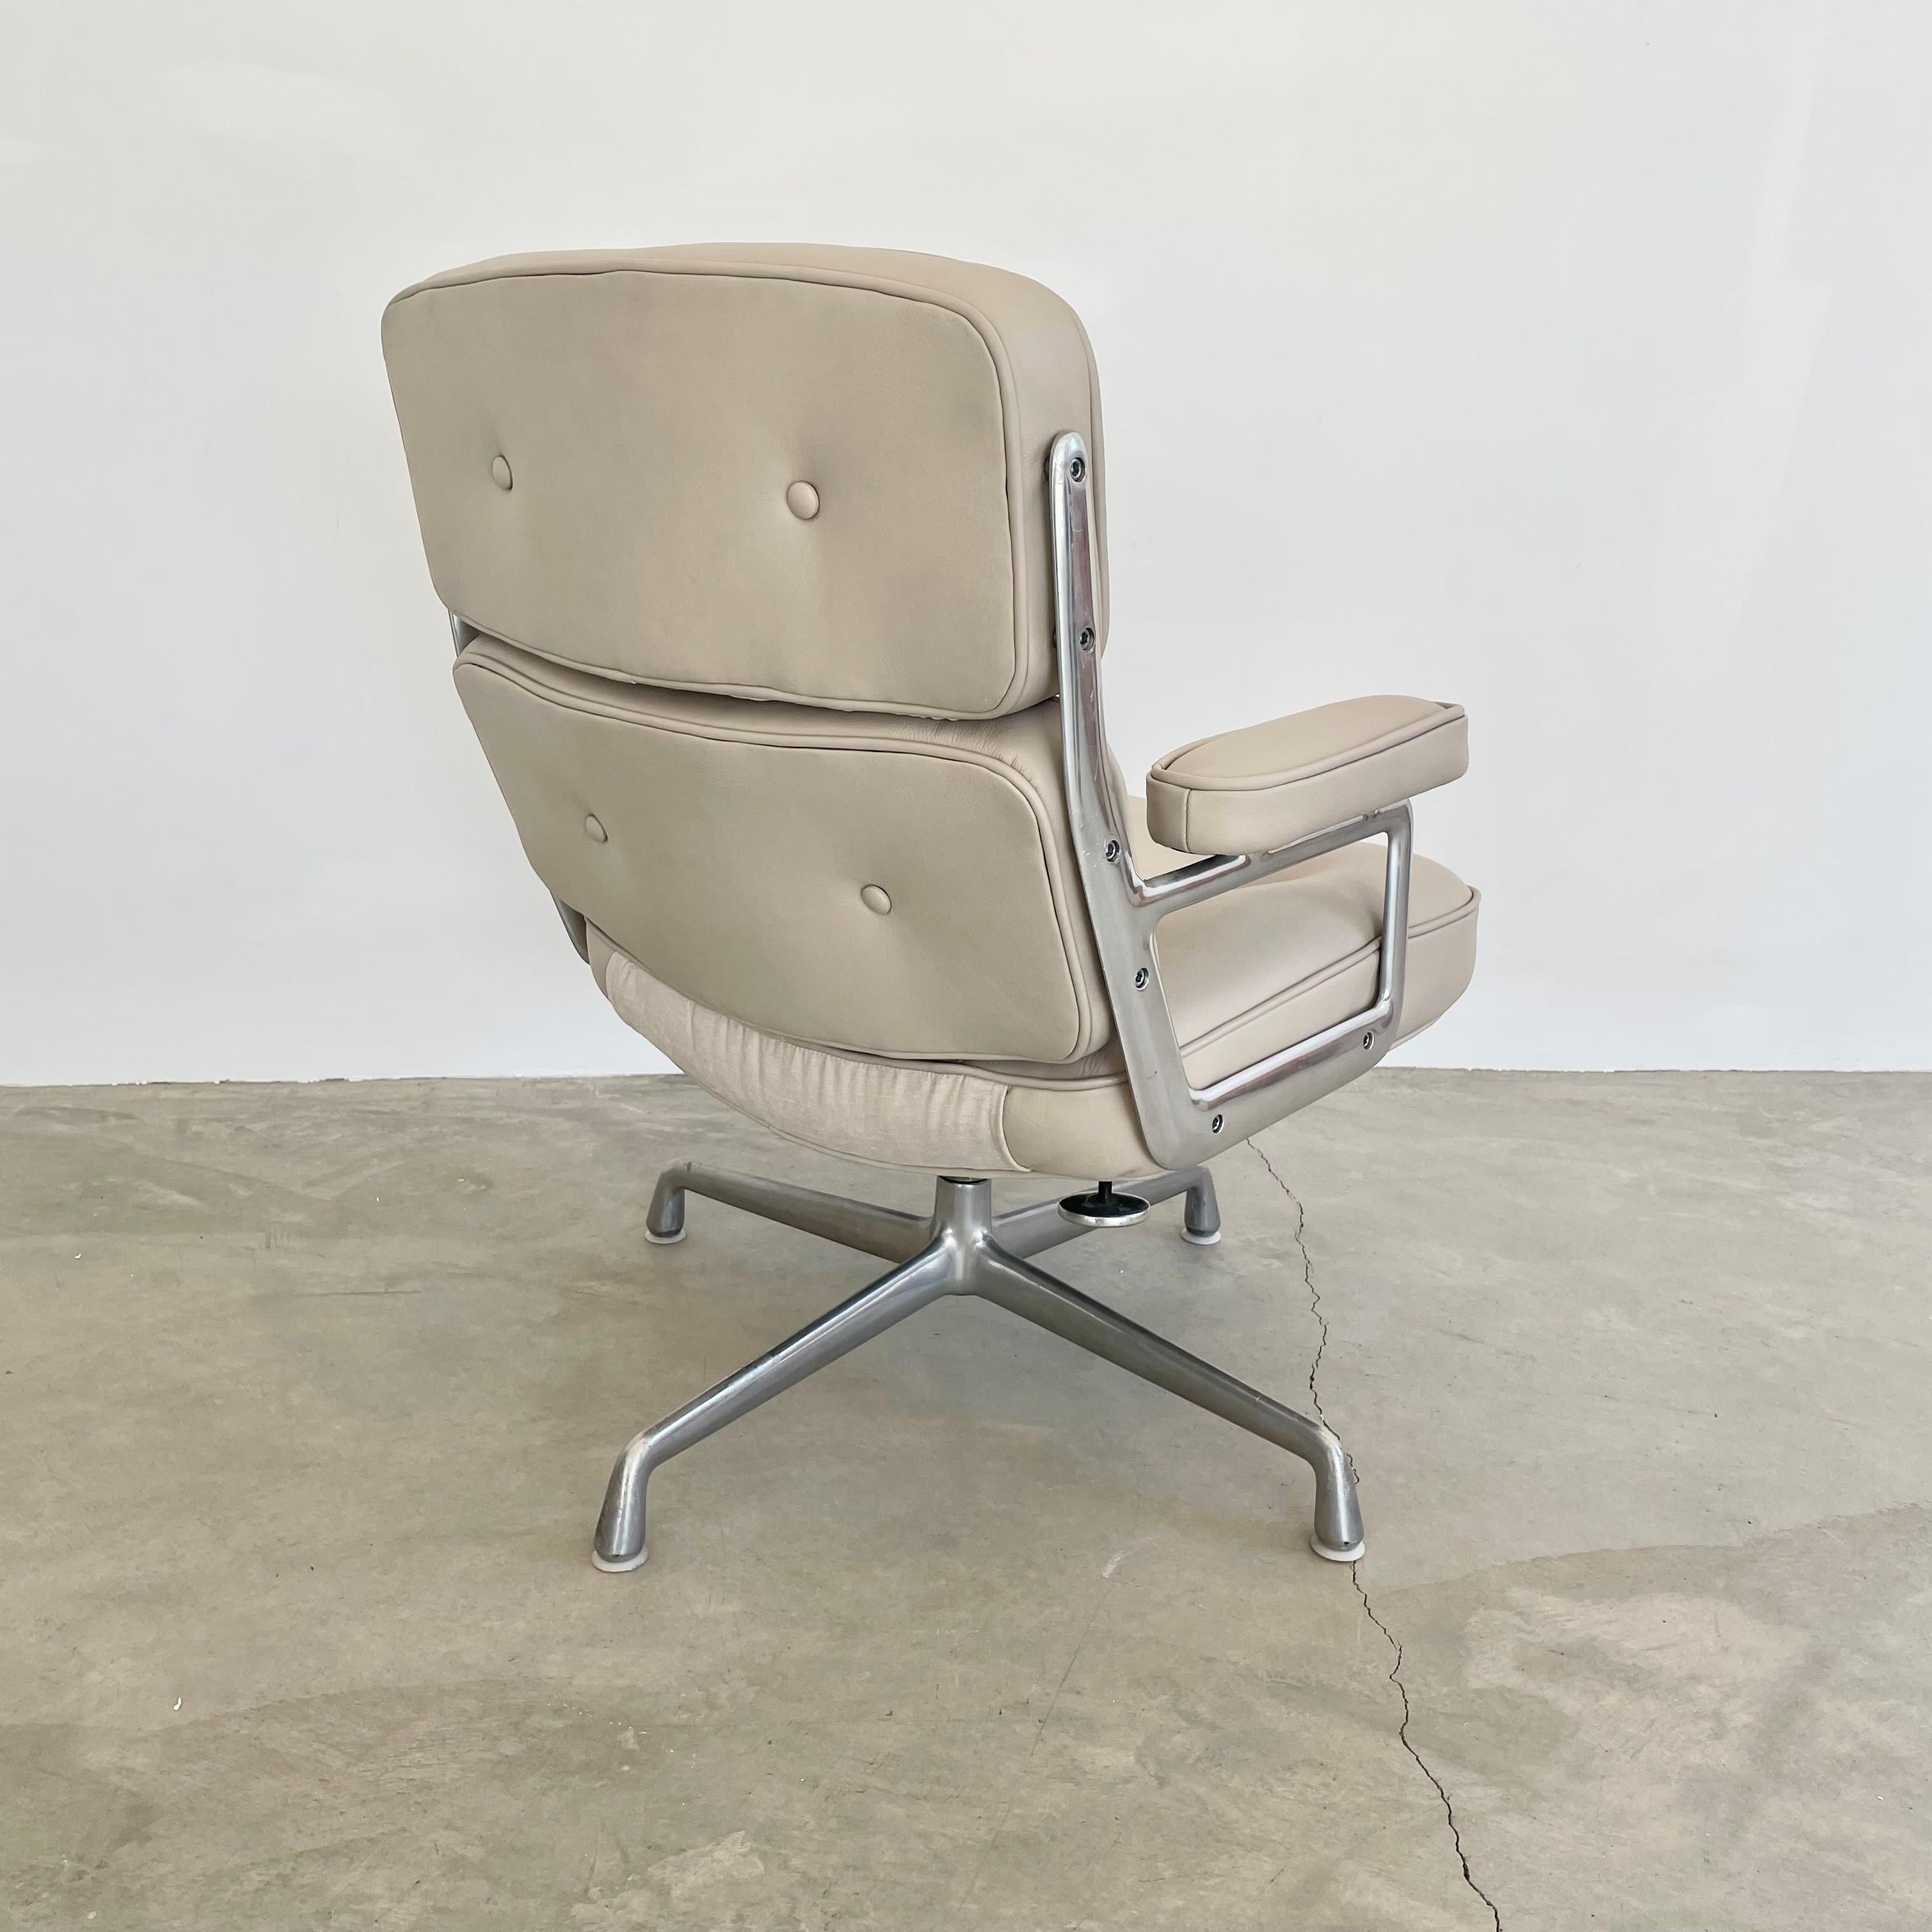 American Eames Time Life Chair in Grey Leather for Herman Miller, 1980s For Sale